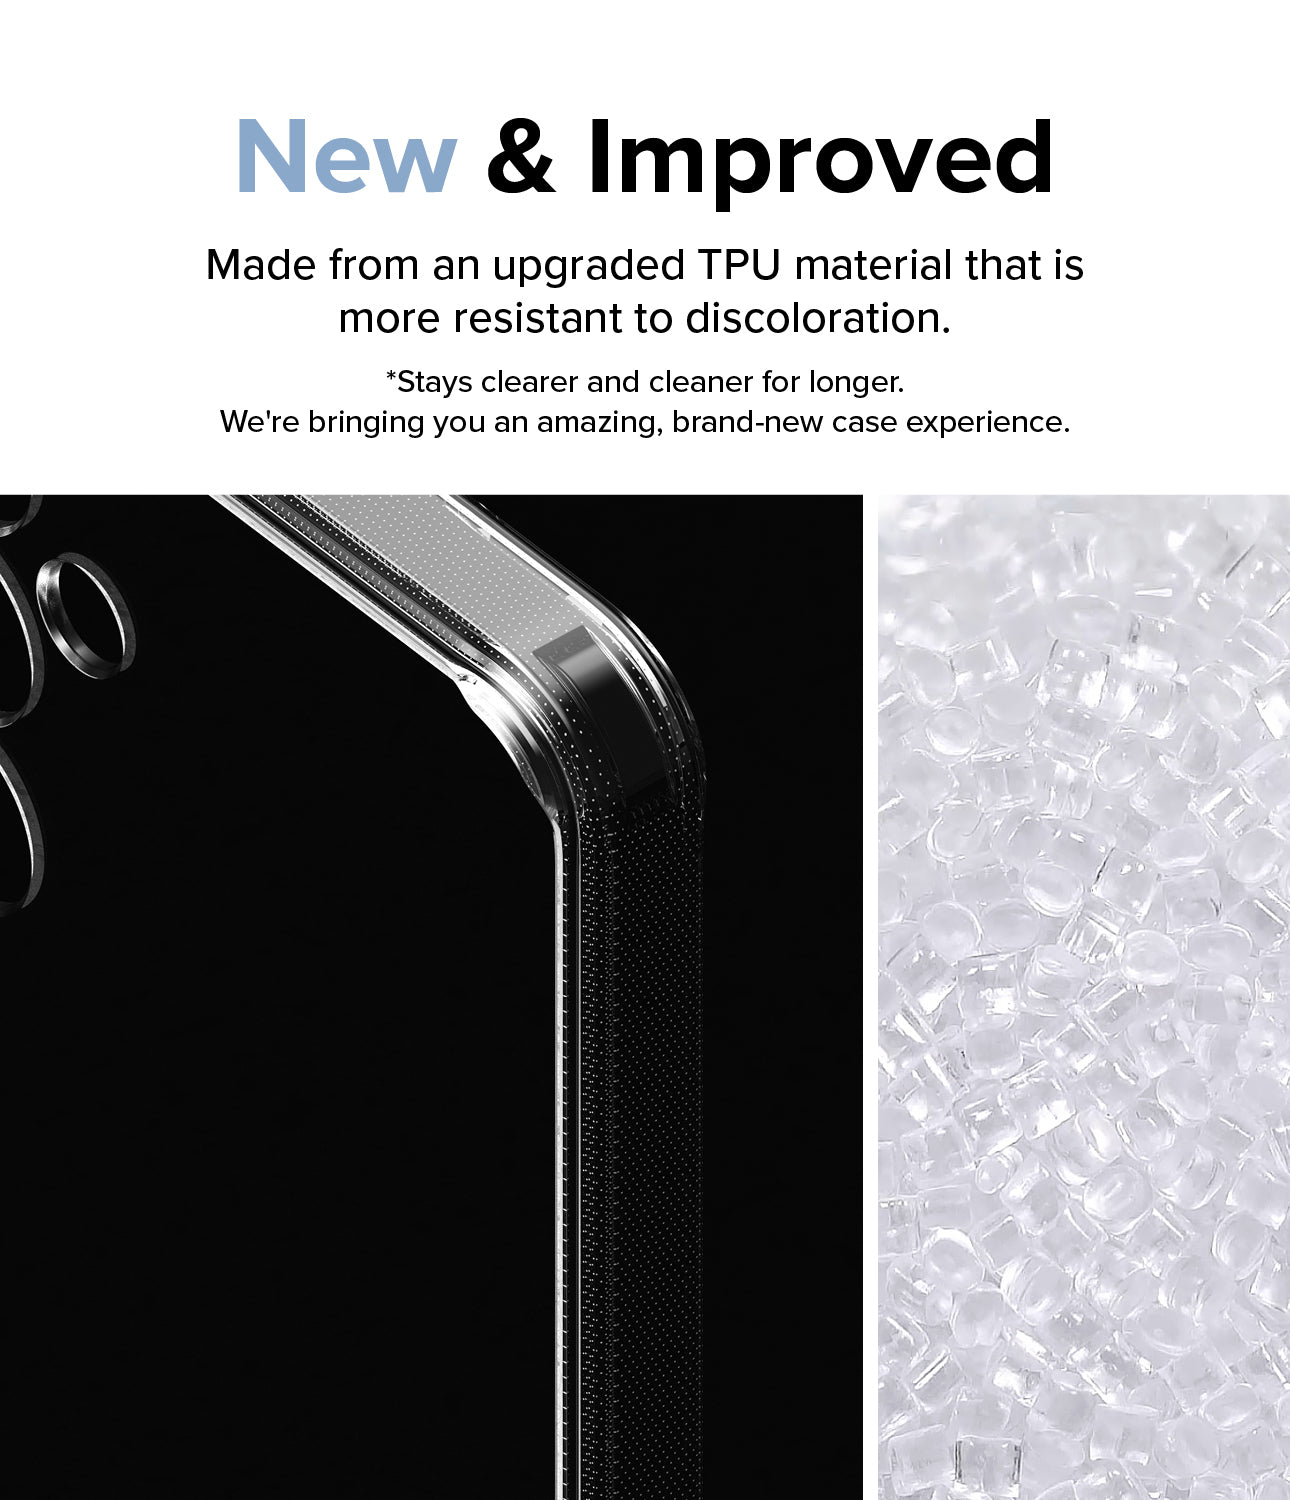 Galaxy A35 Case | Fusion - New and Improved. Made from an upgraded TPU material that is more resistant discoloration. Stays clearer for longer. We're bringing you an amazing, brand-new case experience.